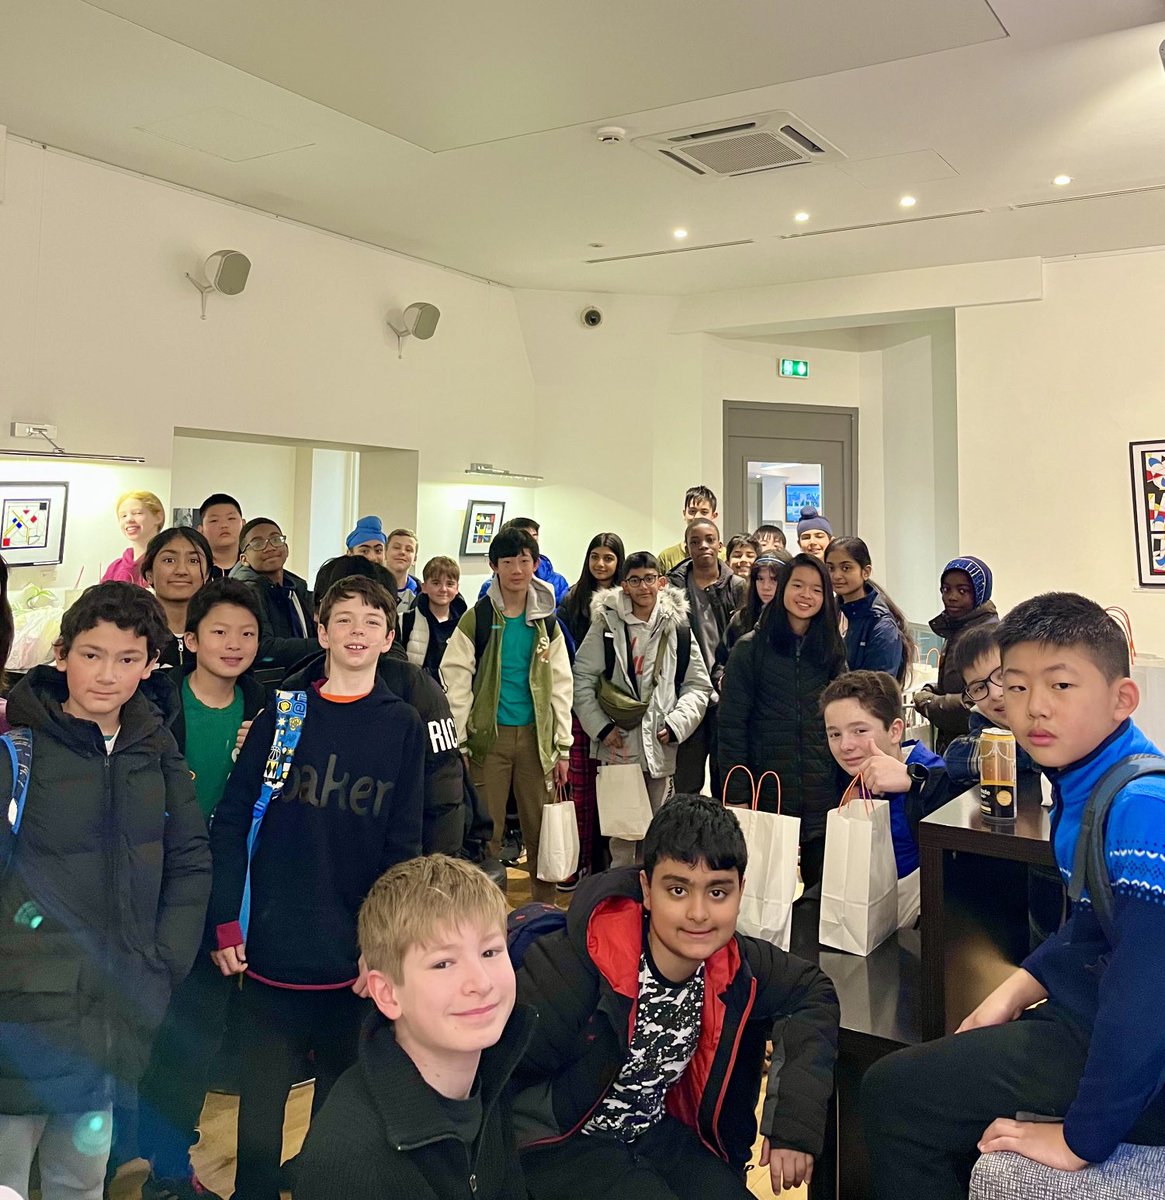 Good morning! We’re ready to leave our hotel and head towards Calais for our return home. We’ve had a great time. 🇩🇪🇫🇷 #yr7mfl24 ⁦@NottsHigh⁩ ⁦@Year7_NHS⁩